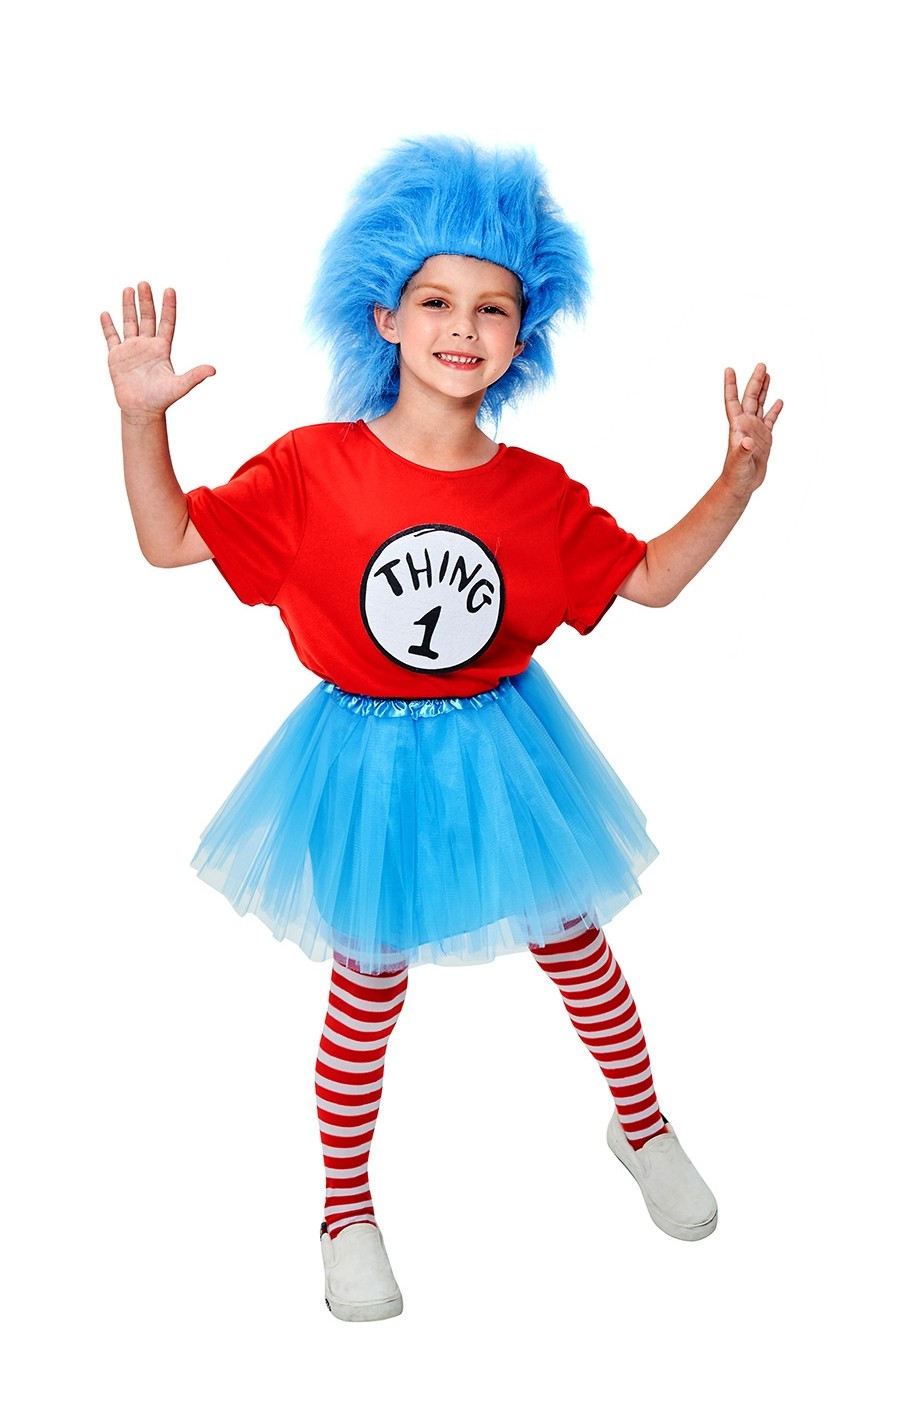 Seuss Thing 1 & Thing 2 Leggings Child Size 3-6 One Size Fits Kost BRAND NEW Dr